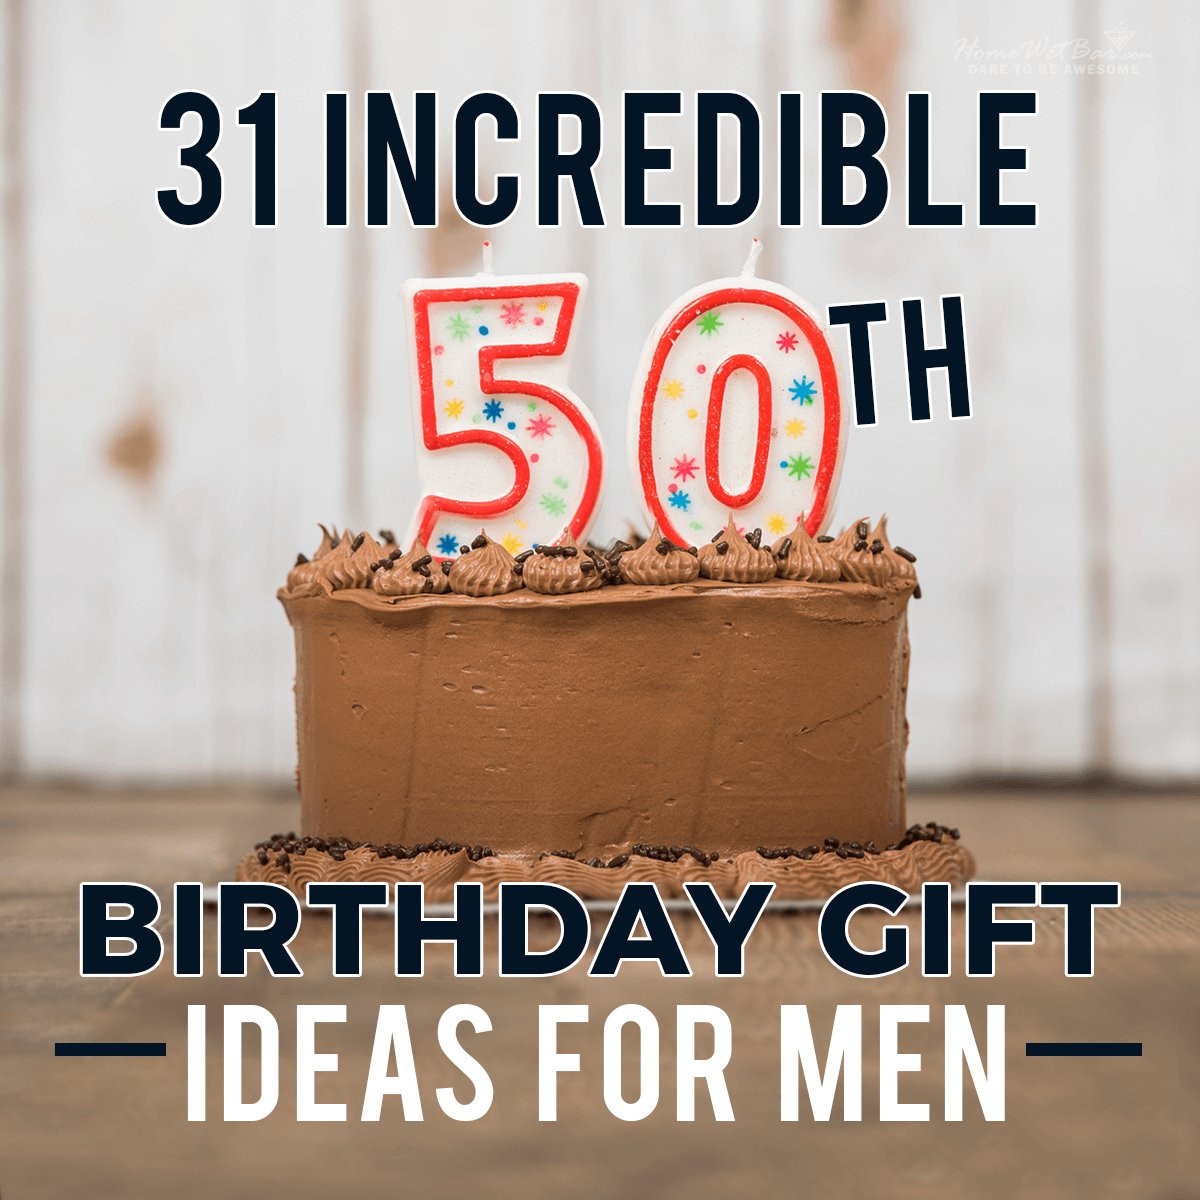 50Th Birthday Gift Ideas For Men
 31 Incredible 50th Birthday Gift Ideas for Men